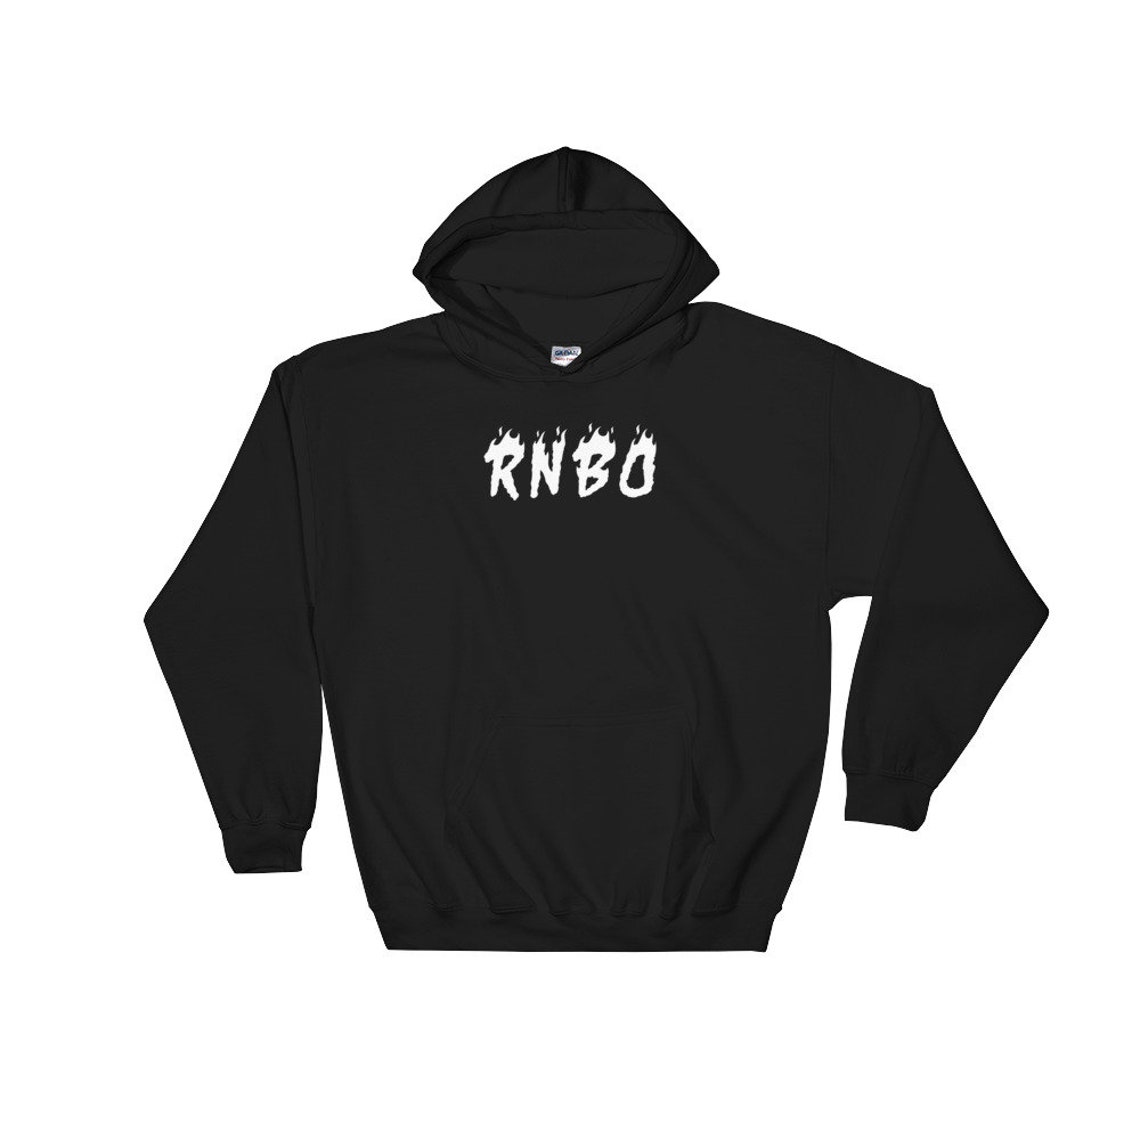 RNBO Hoodie Jake Paul Merch Rise and Be Original Clothing | Etsy